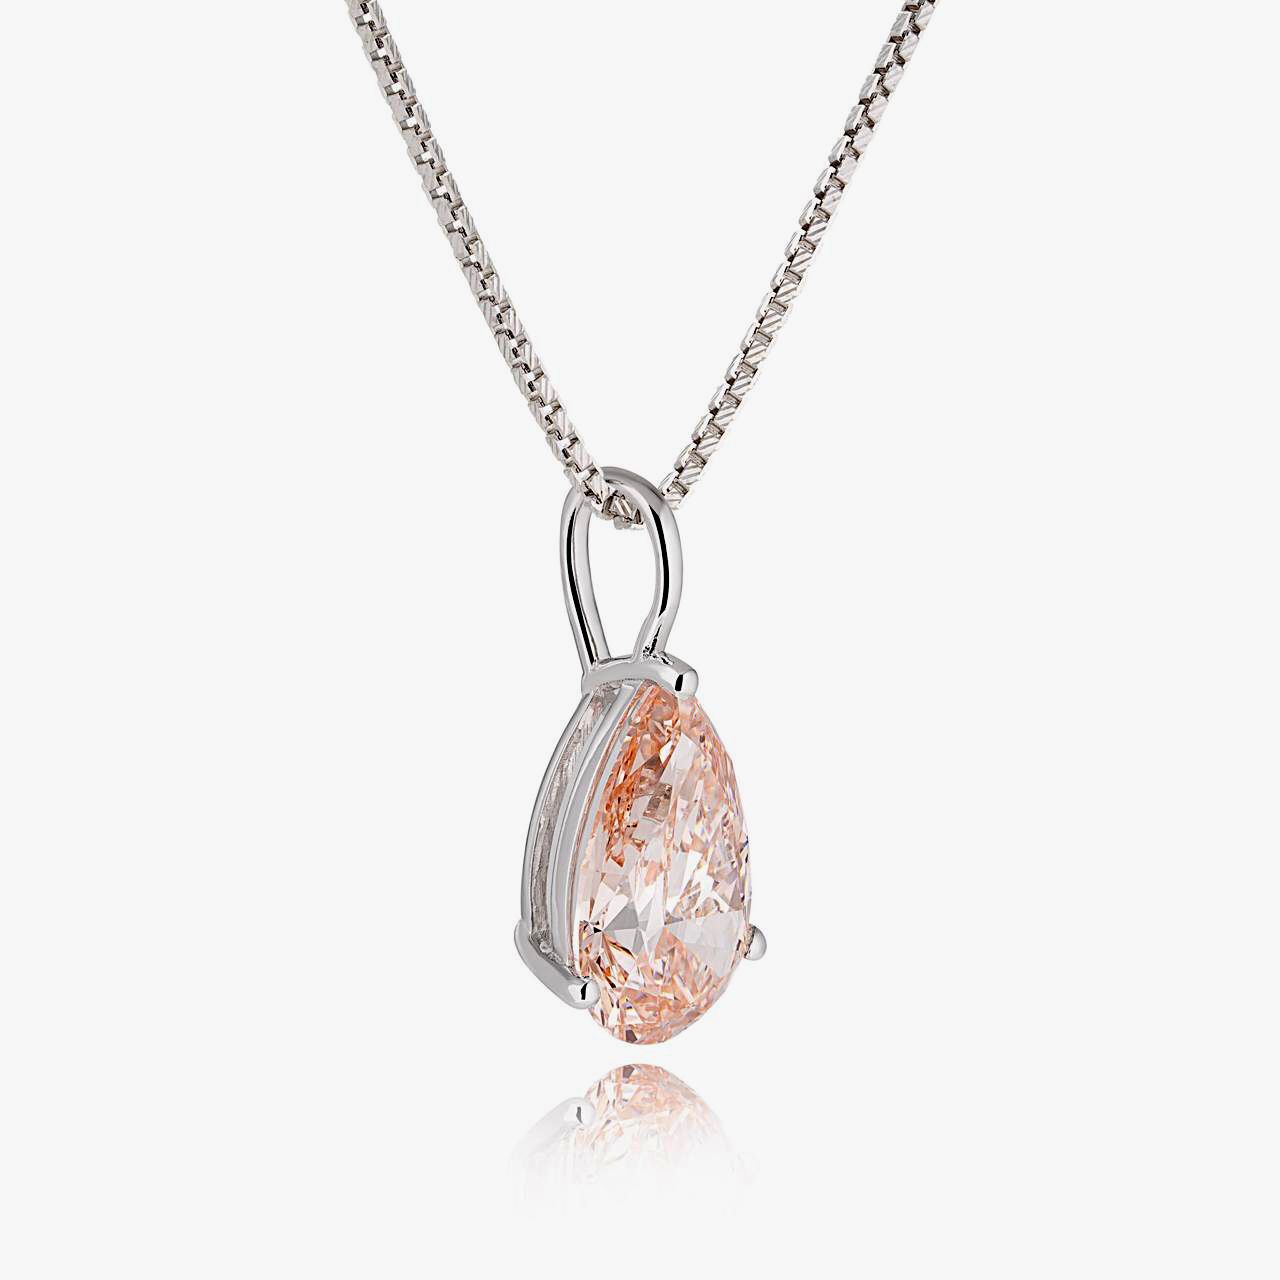 ** ON SALE ** Fancy Intense Pink Pear Cut 4.01ct Diamond Pendant VS2 Clarity 18kt White Gold Ex Ex - Image 2 of 4